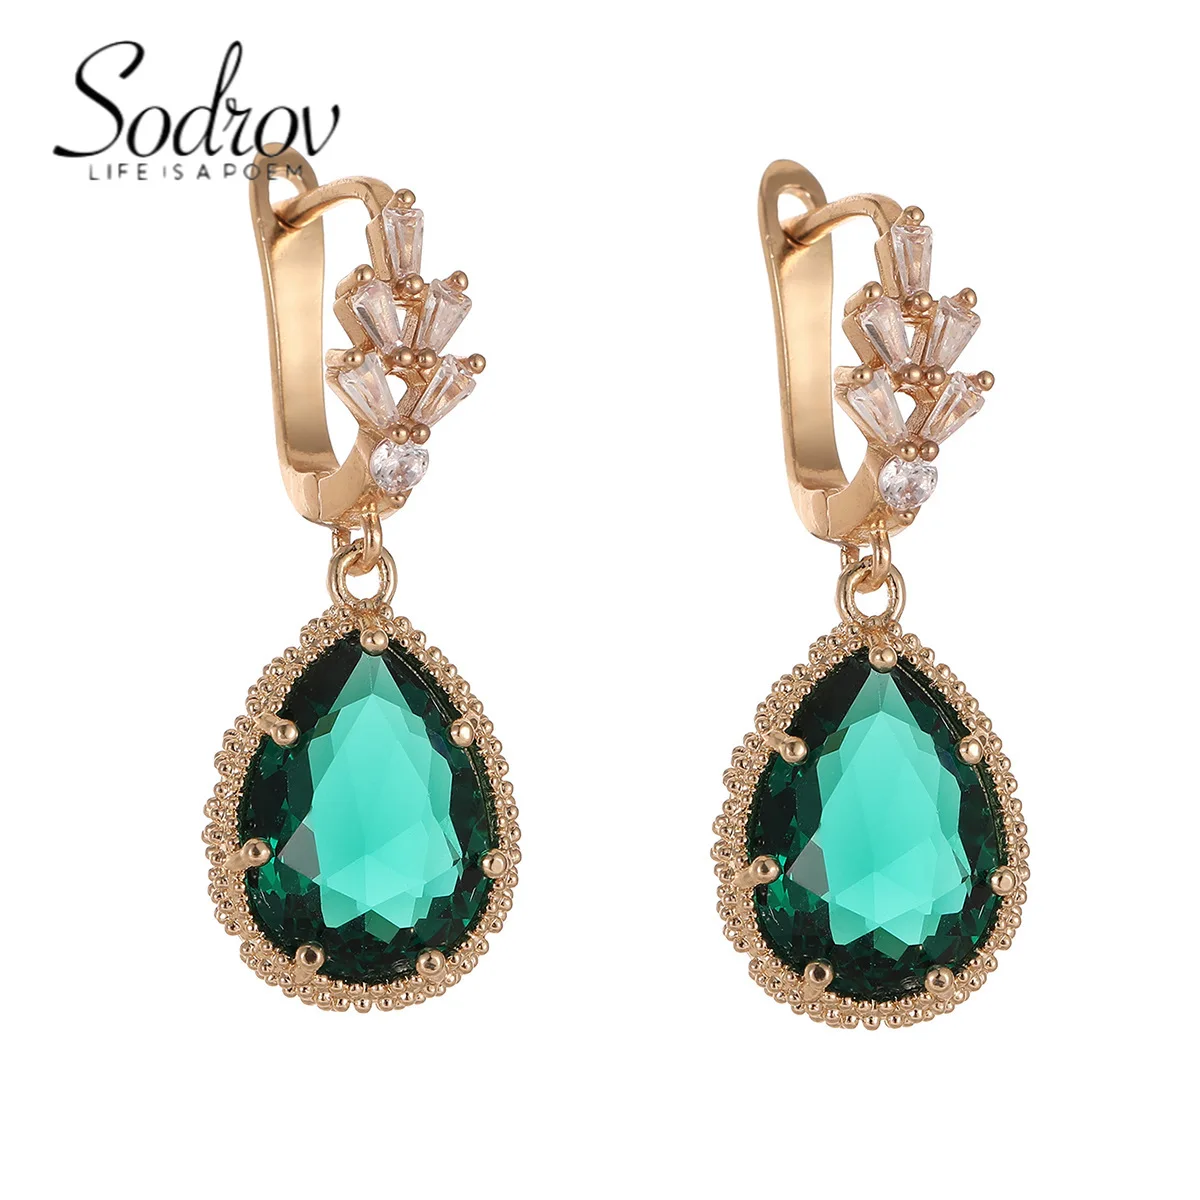 

SODROV Vintage Gold Plated Green Crystalzircon Jewelry Drop Earrings for Women Engagement Wedding Gift